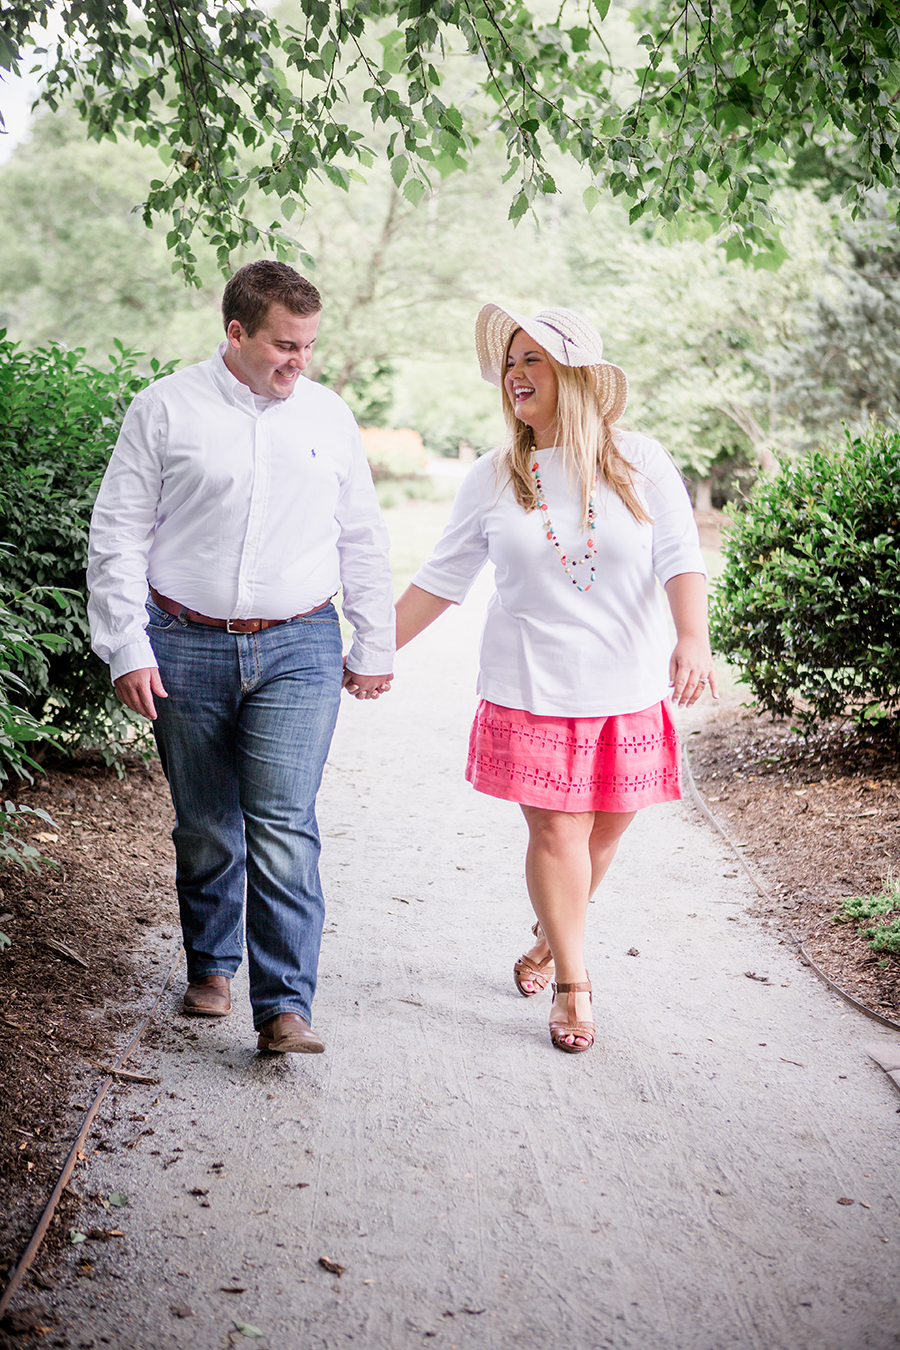 Walking in her floppy hat engagement photo by Knoxville Wedding Photographer, Amanda May Photos.